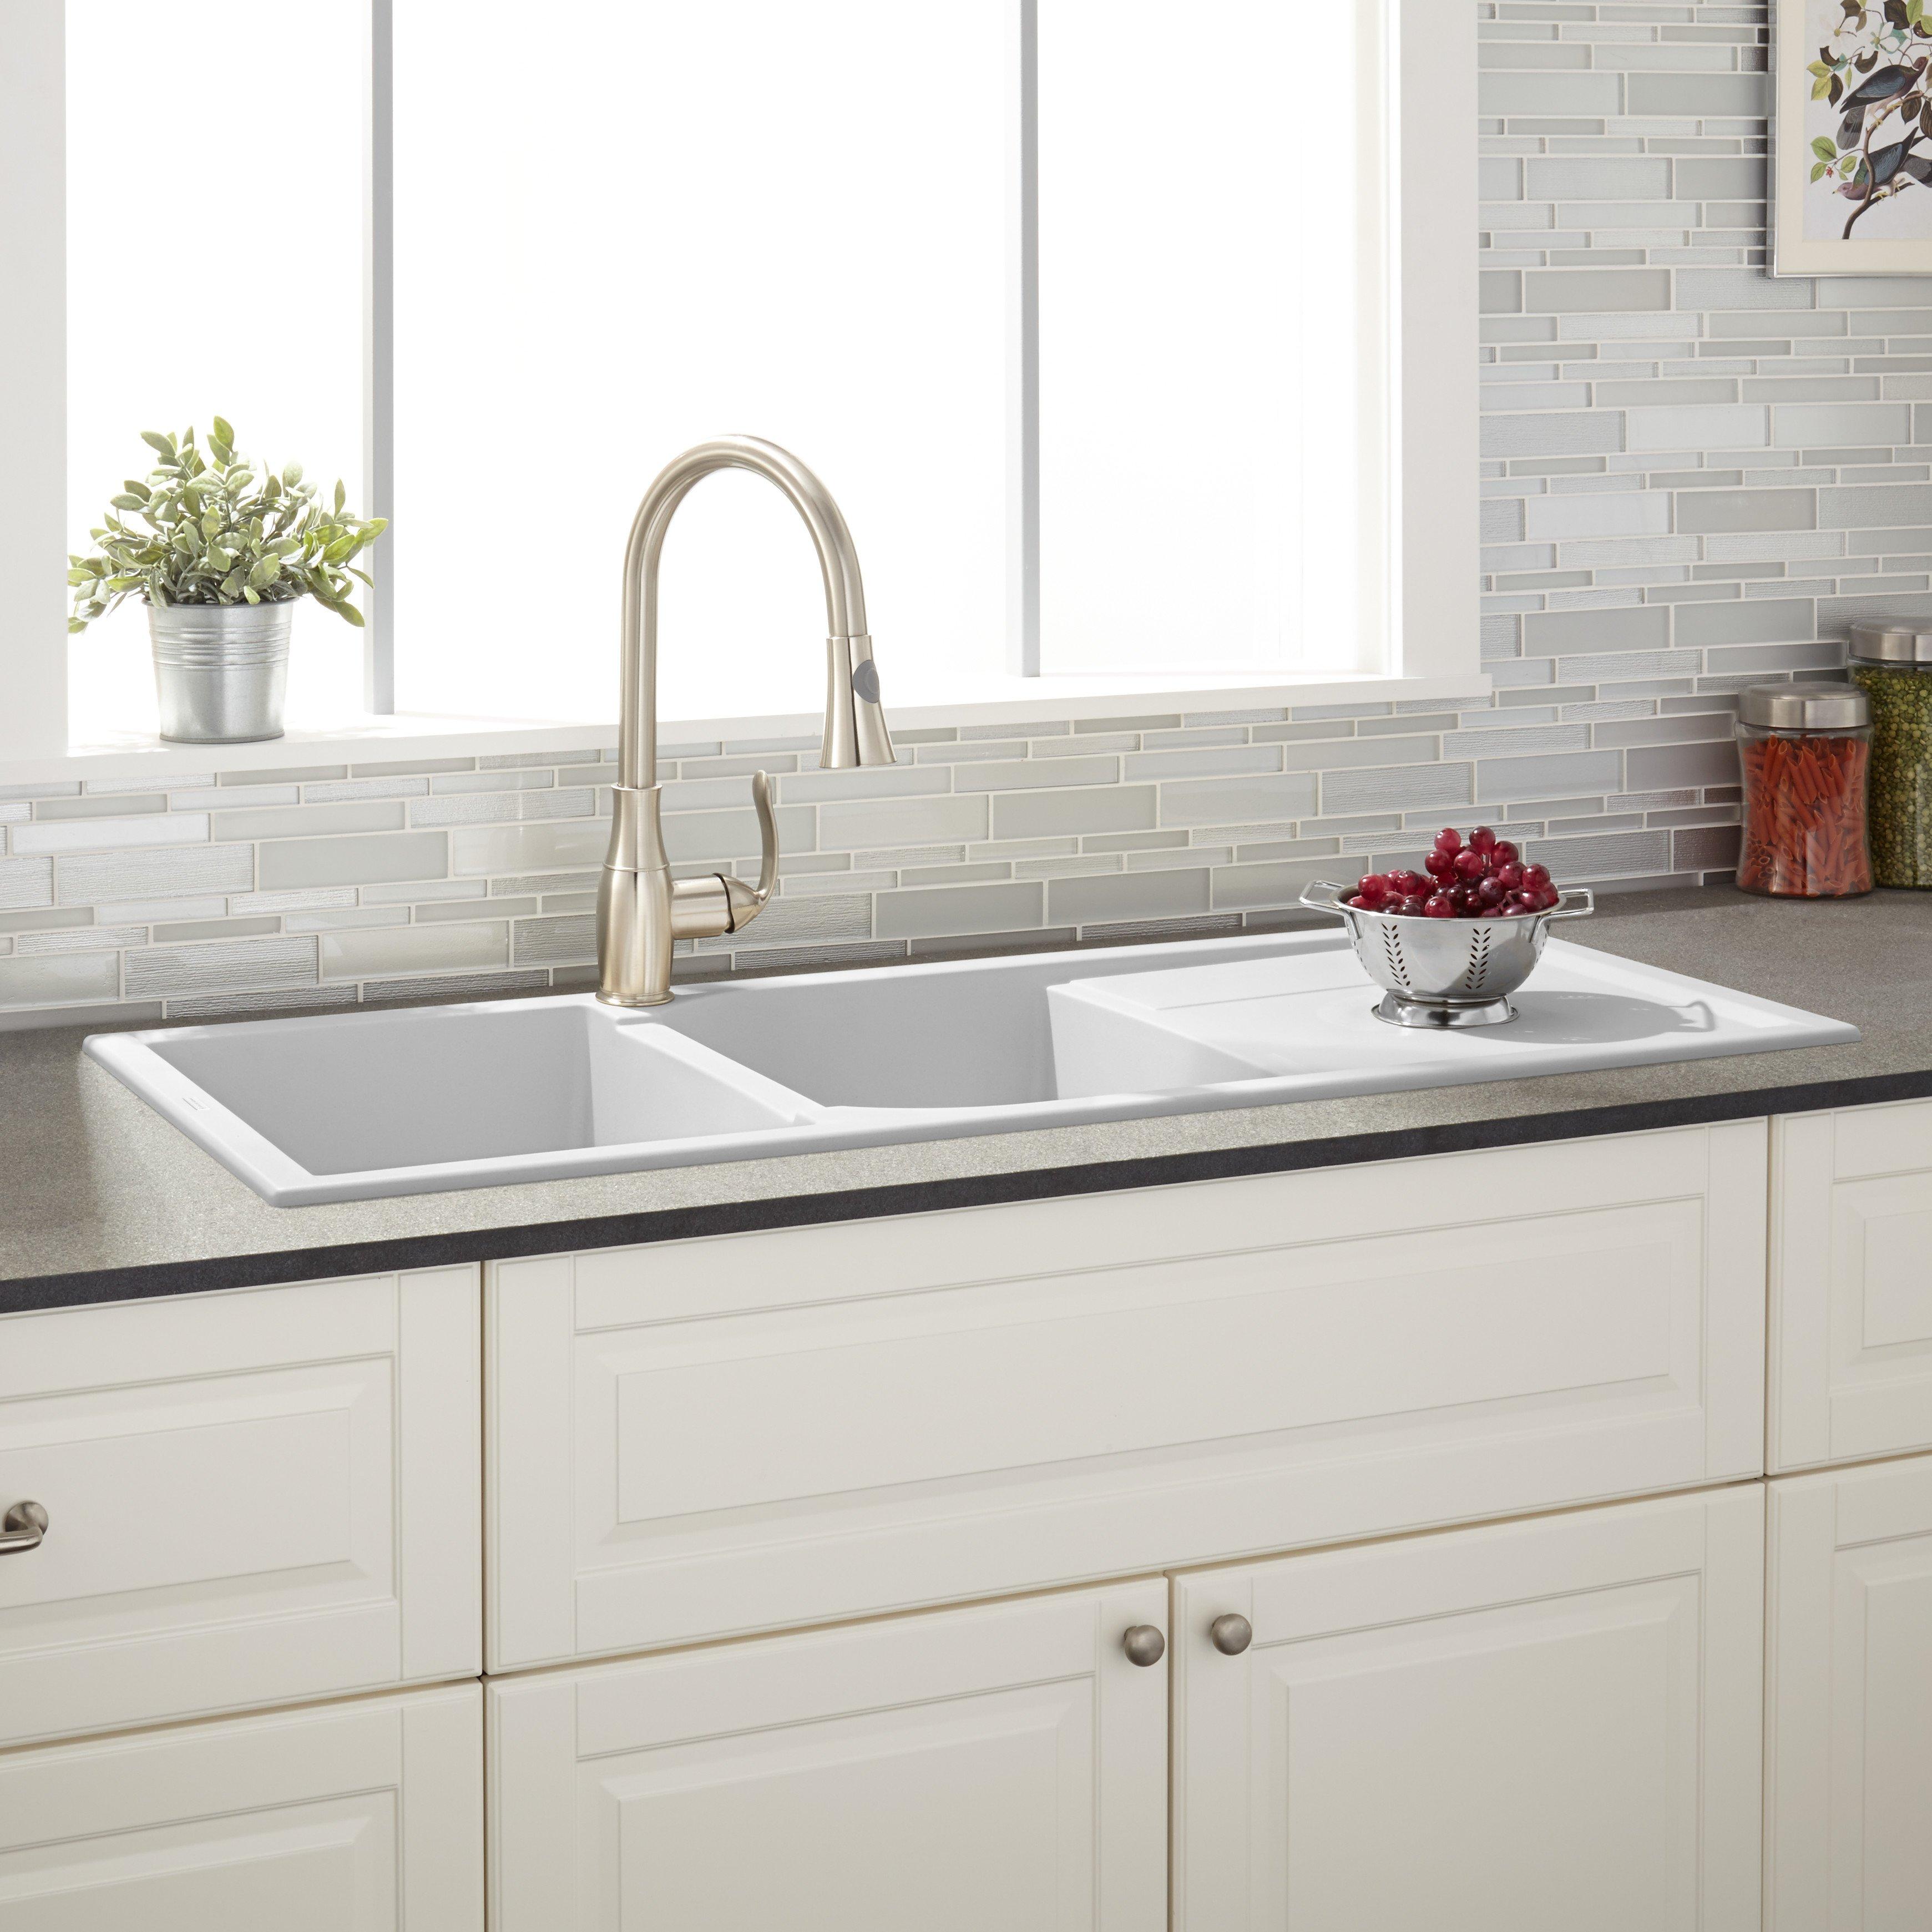 425909 Tansi Dbl Drop In Kitchen Sink WH 46 Beauty10 